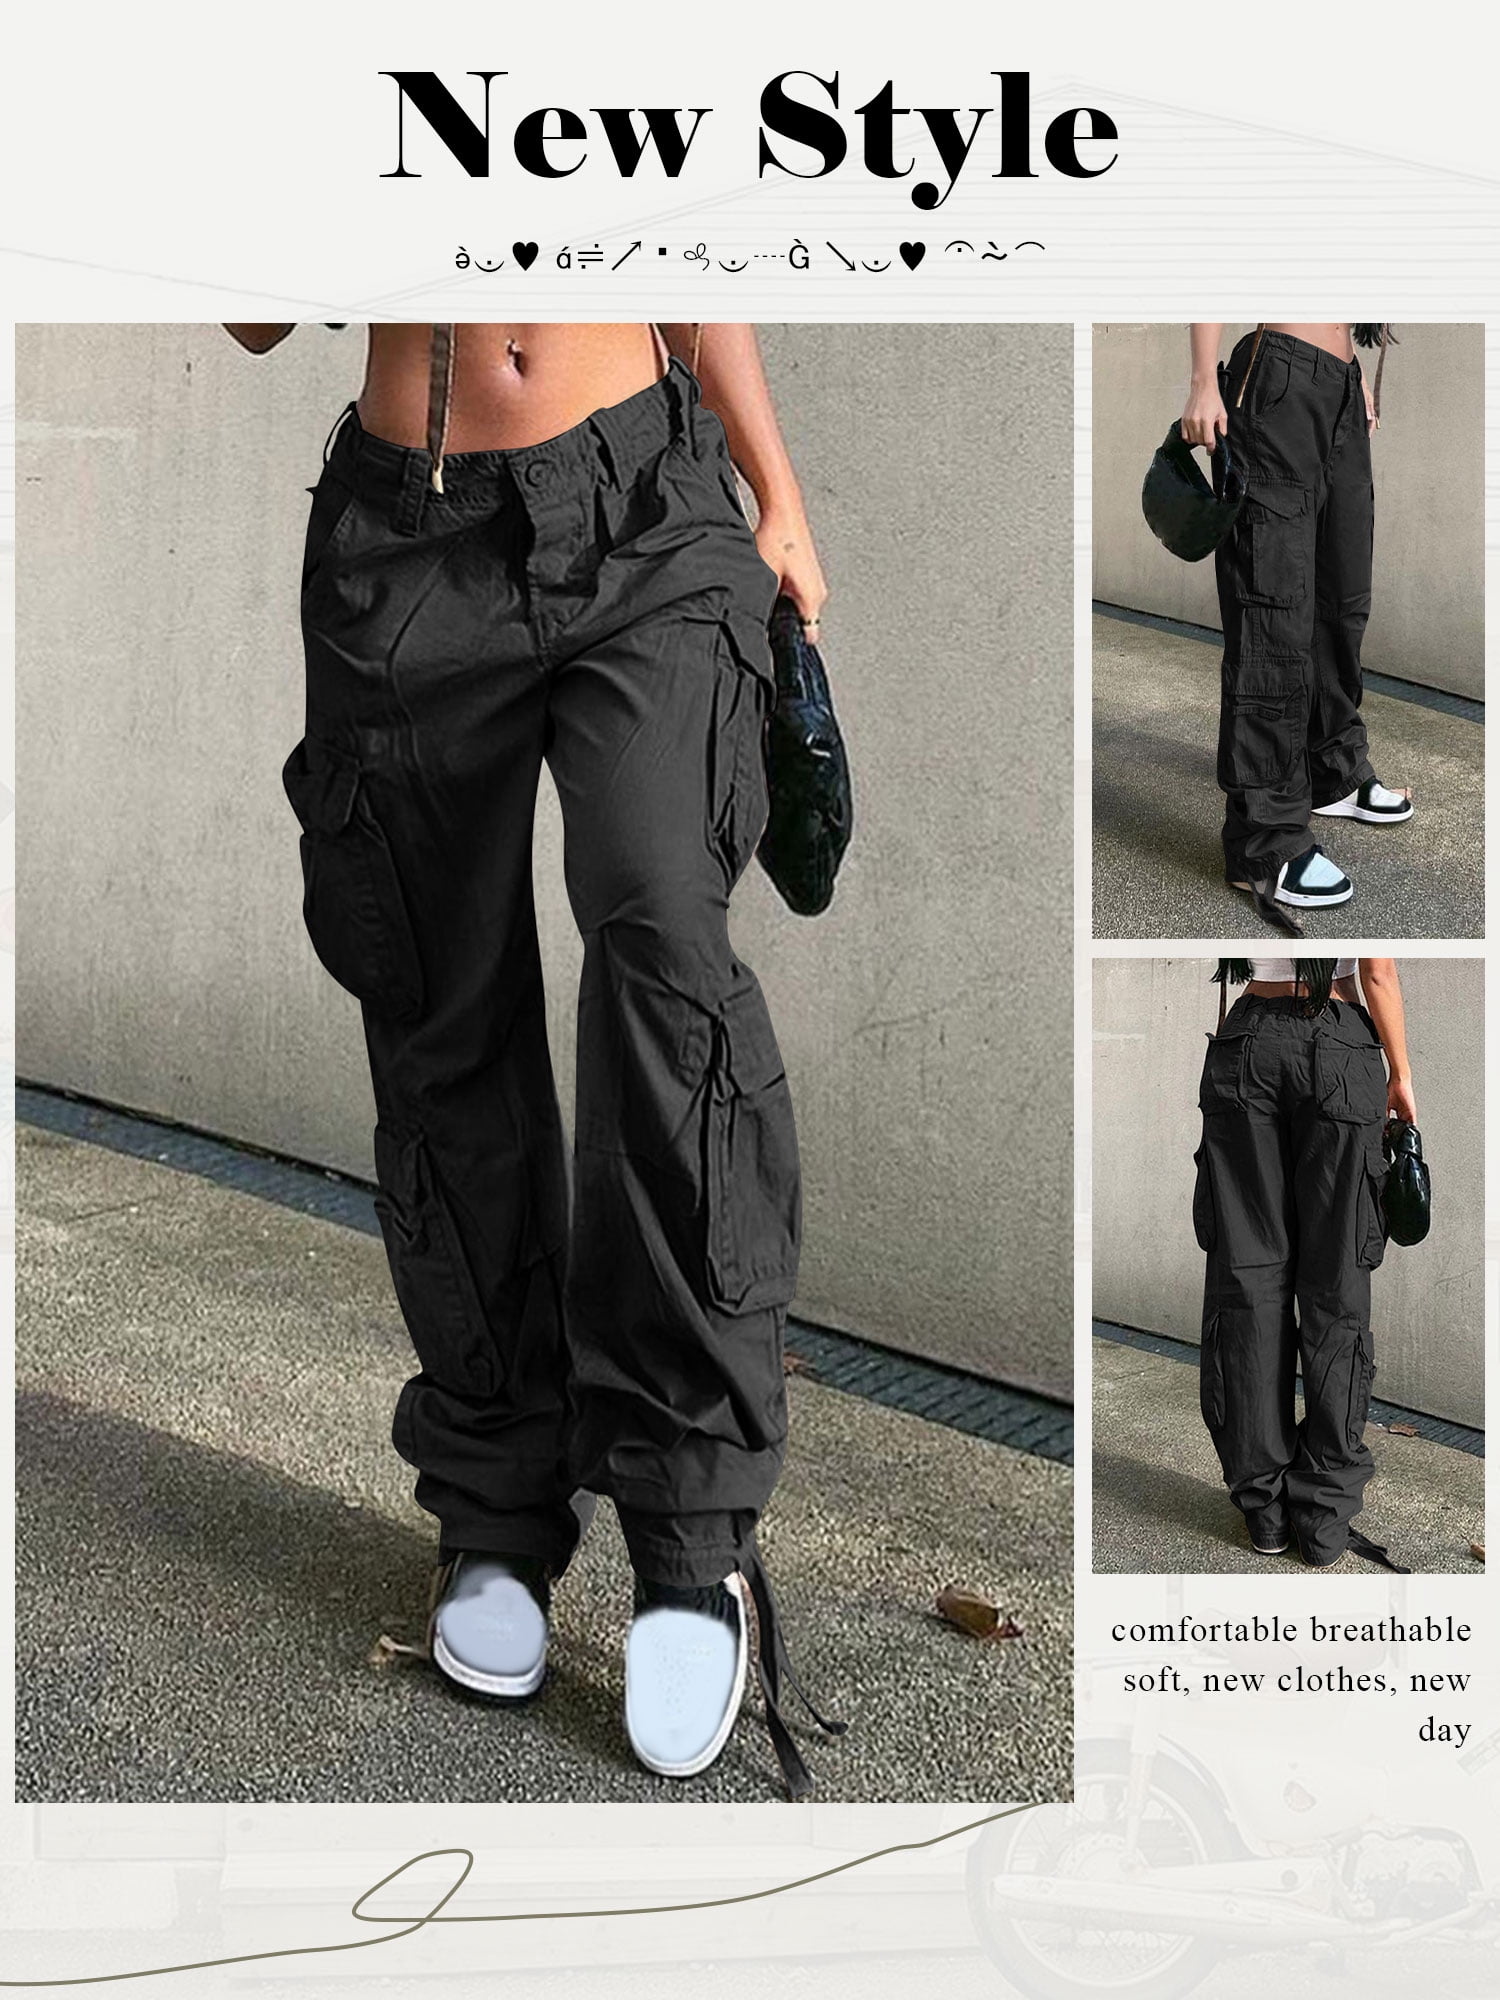 XSSFCC Cargo Pants Women Low Waist Drawstring Casual Long Pants with  Pockets Loose Baggy Cinch Pants